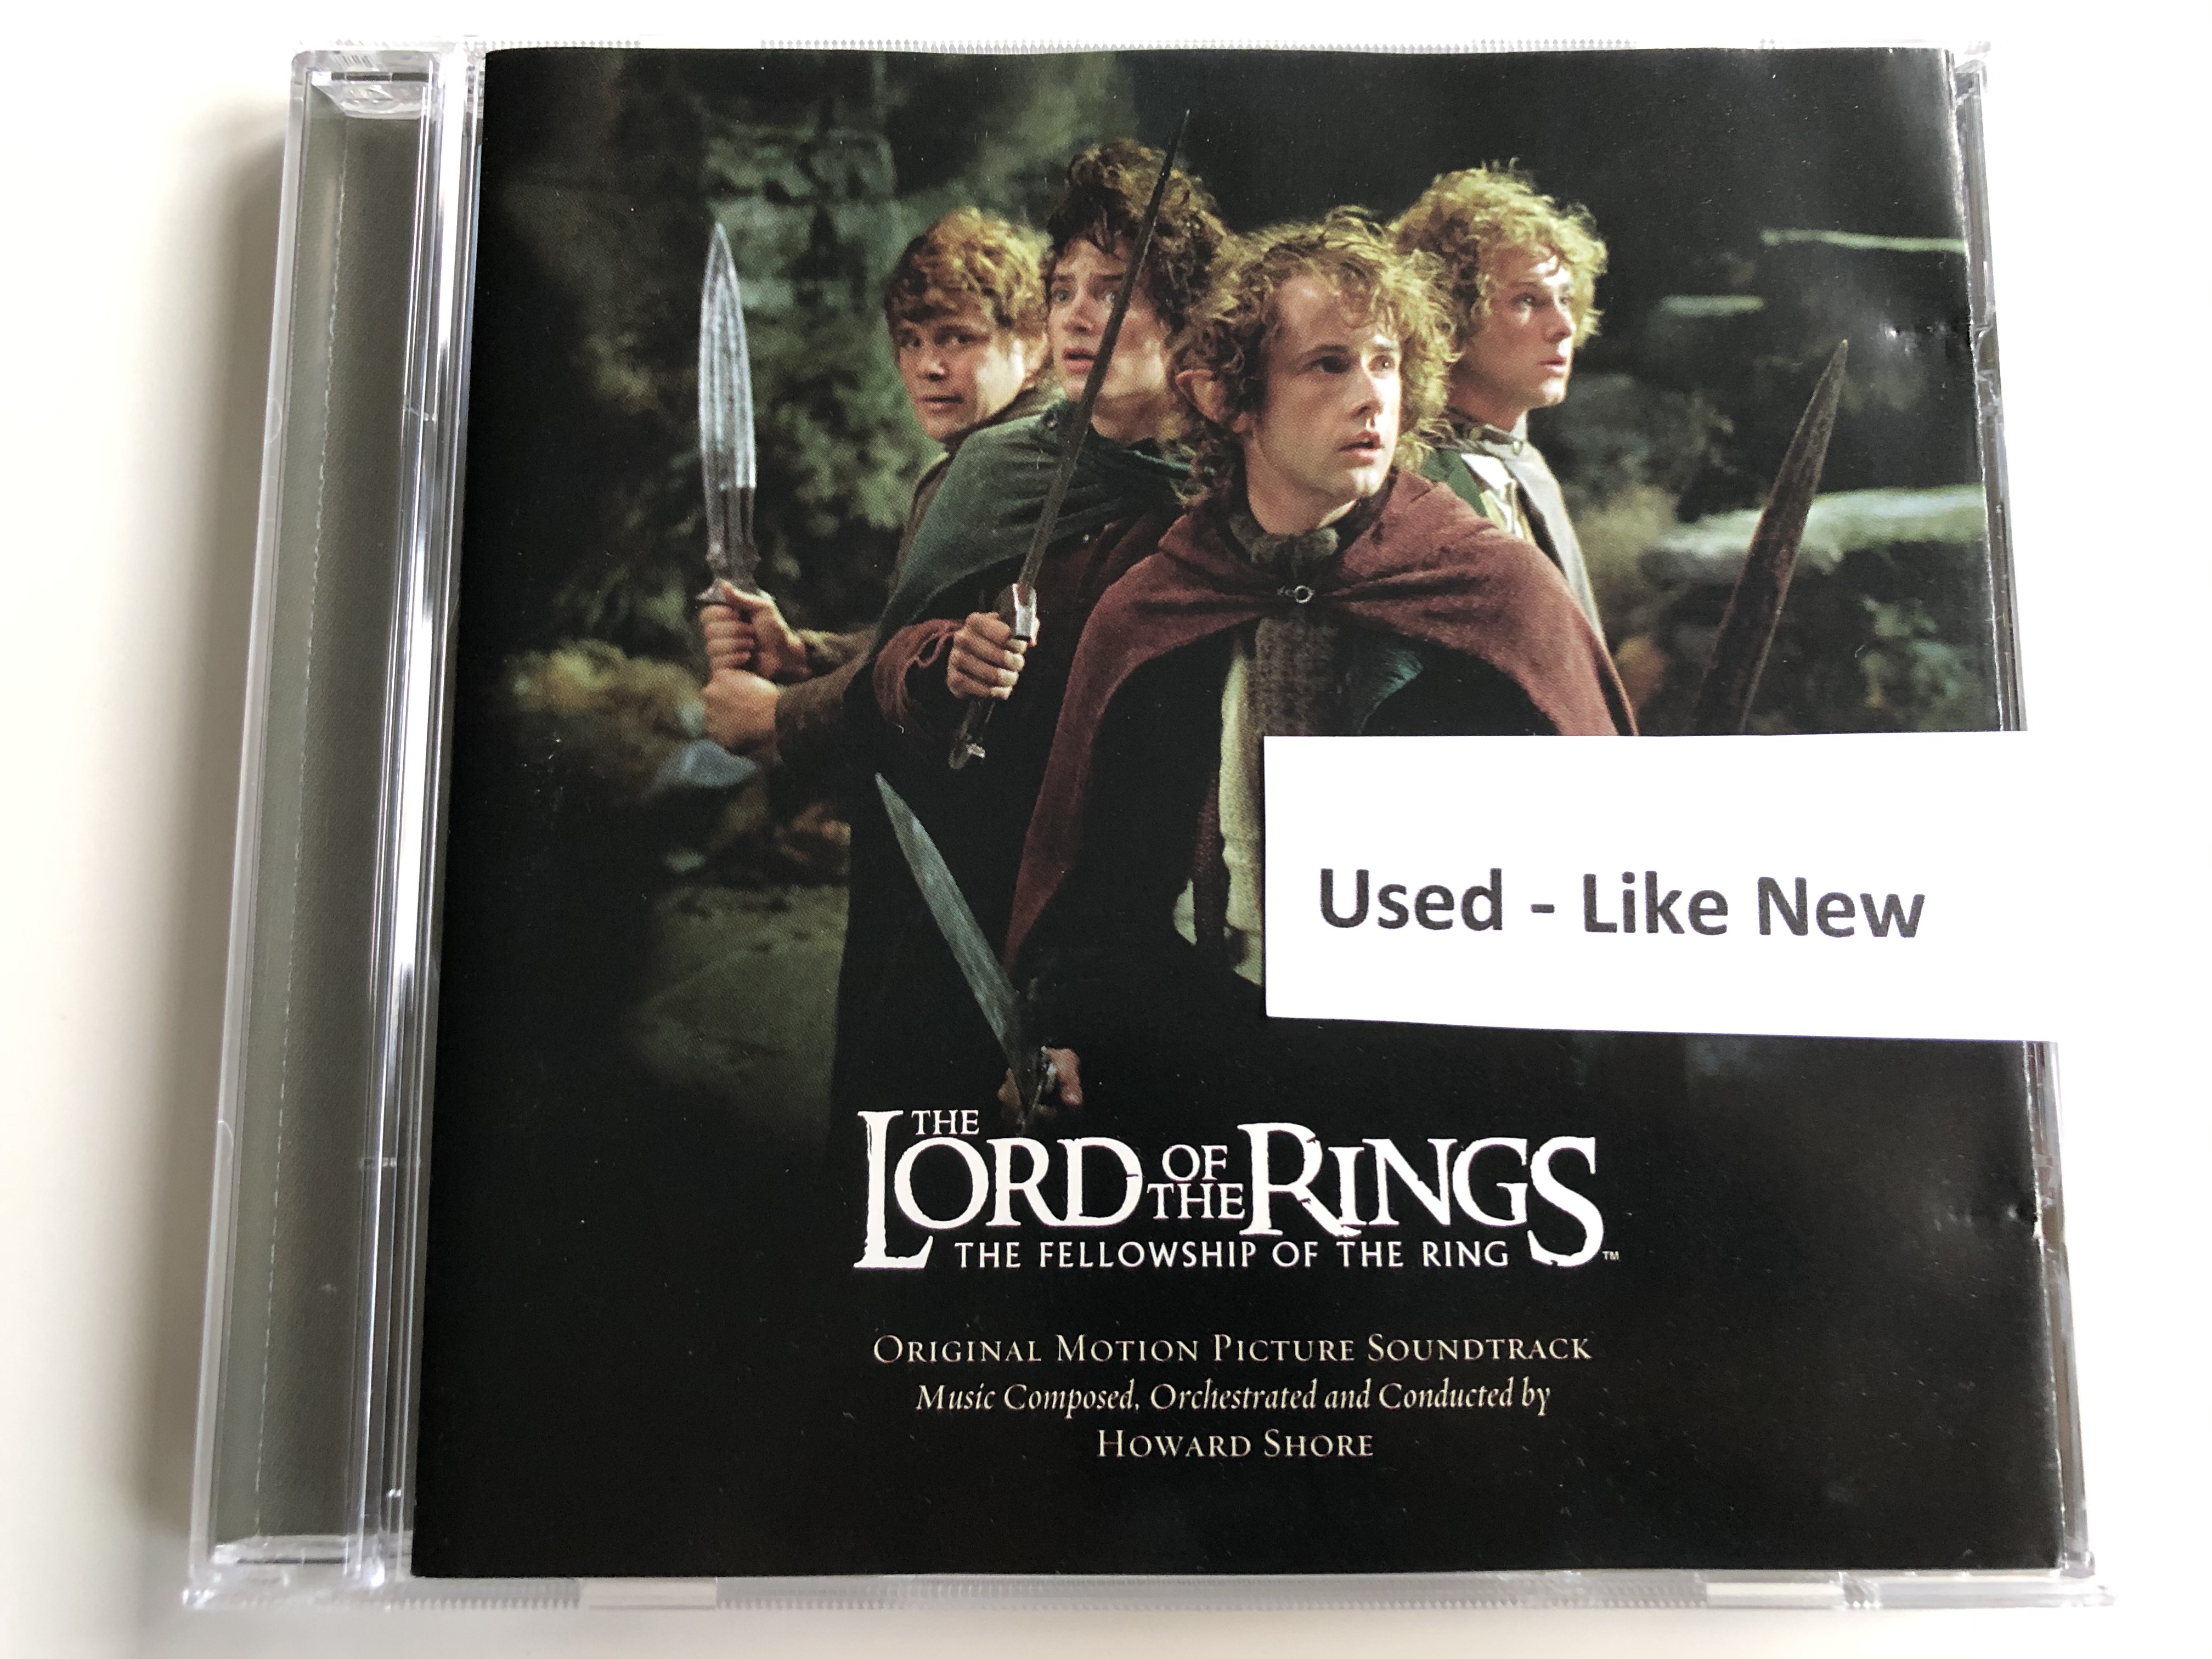 the-lord-of-the-rings-the-fellowship-of-the-ring-original-motion-picture-soundtrack-music-composed-orchestrated-and-conducted-by-howard-shore-reprise-records-audio-cd-2001-9362-48242-2-1-.jpg